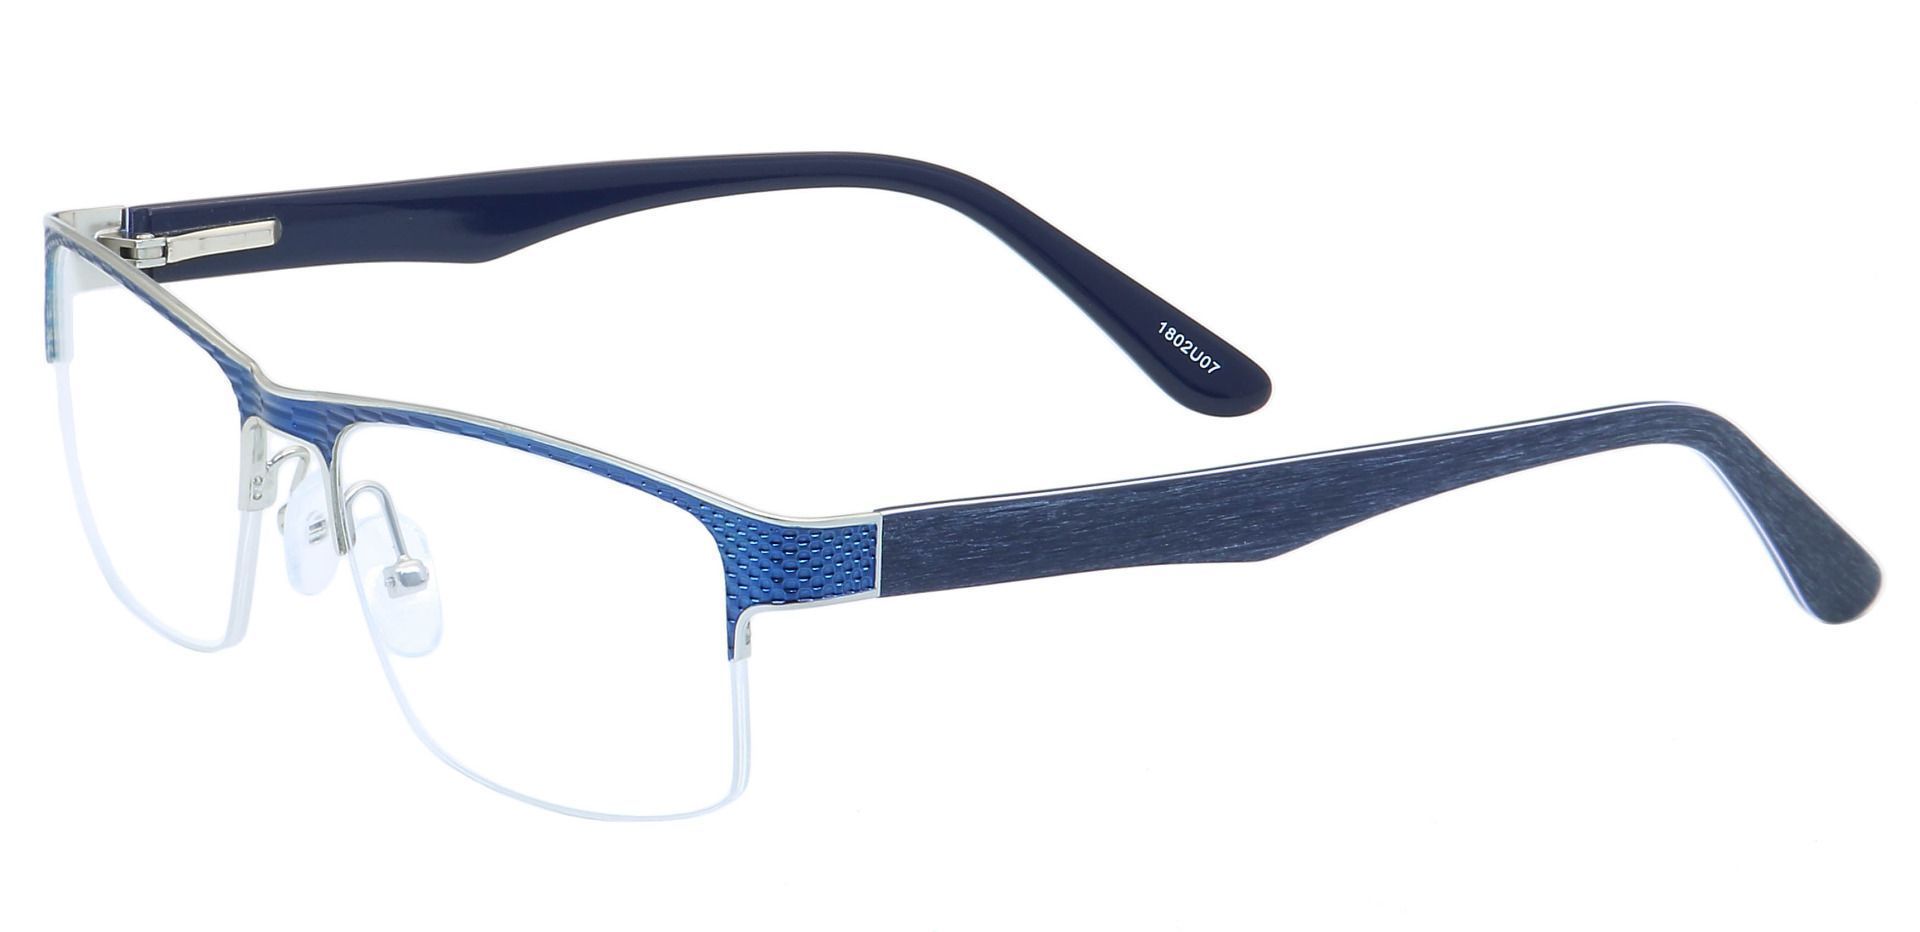 Executive Square Lined Bifocal Glasses - Blue